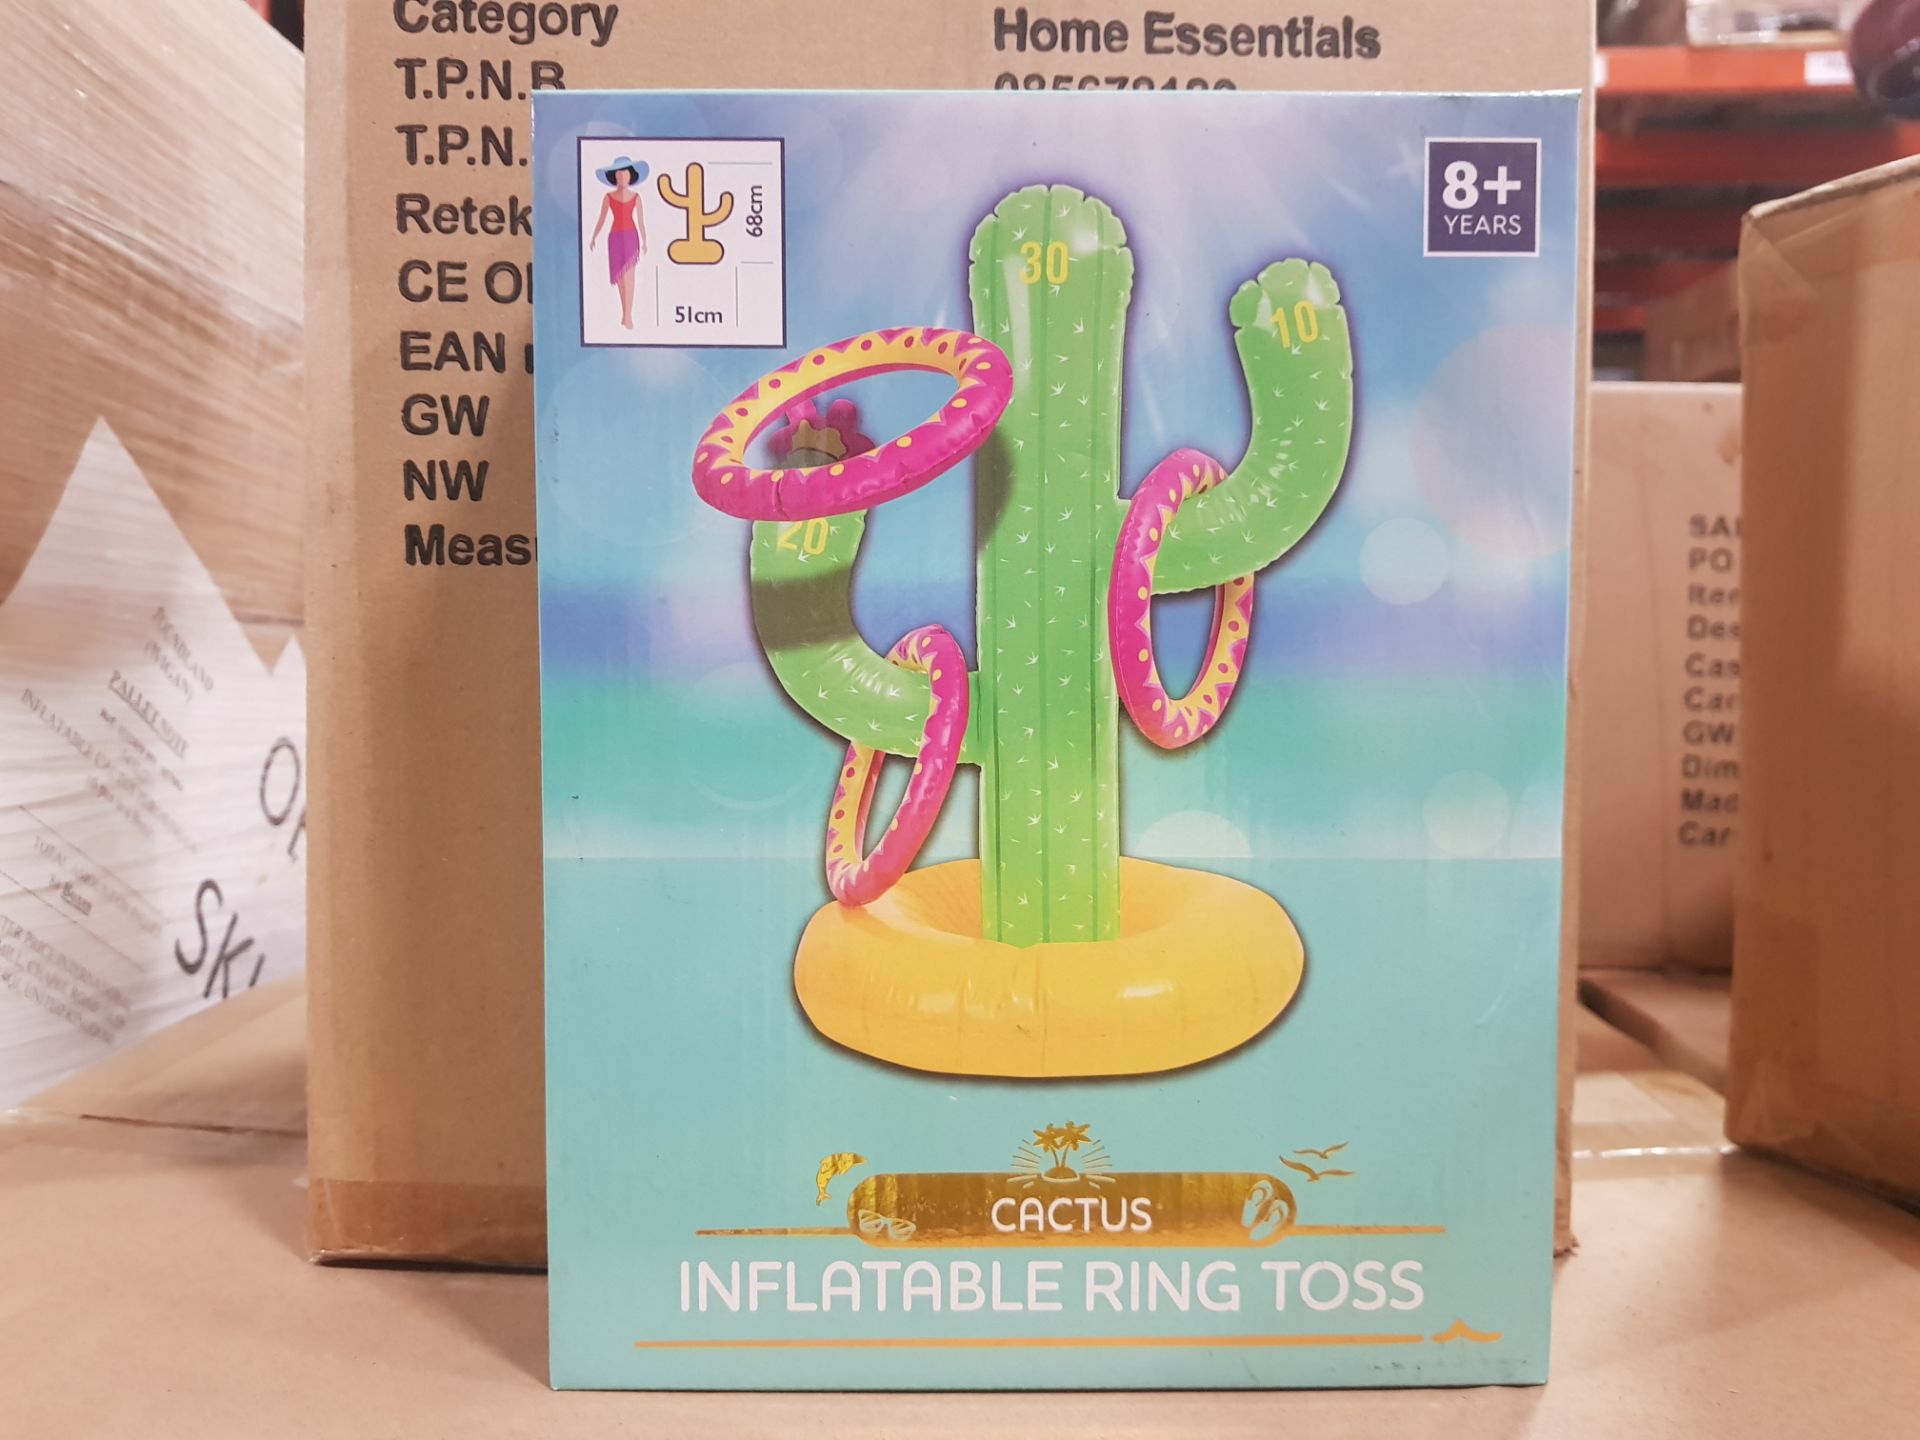 60 X CACTUS INFLATABLE RING TOSS GAME'S - CONTAINED IN 10 BOXES